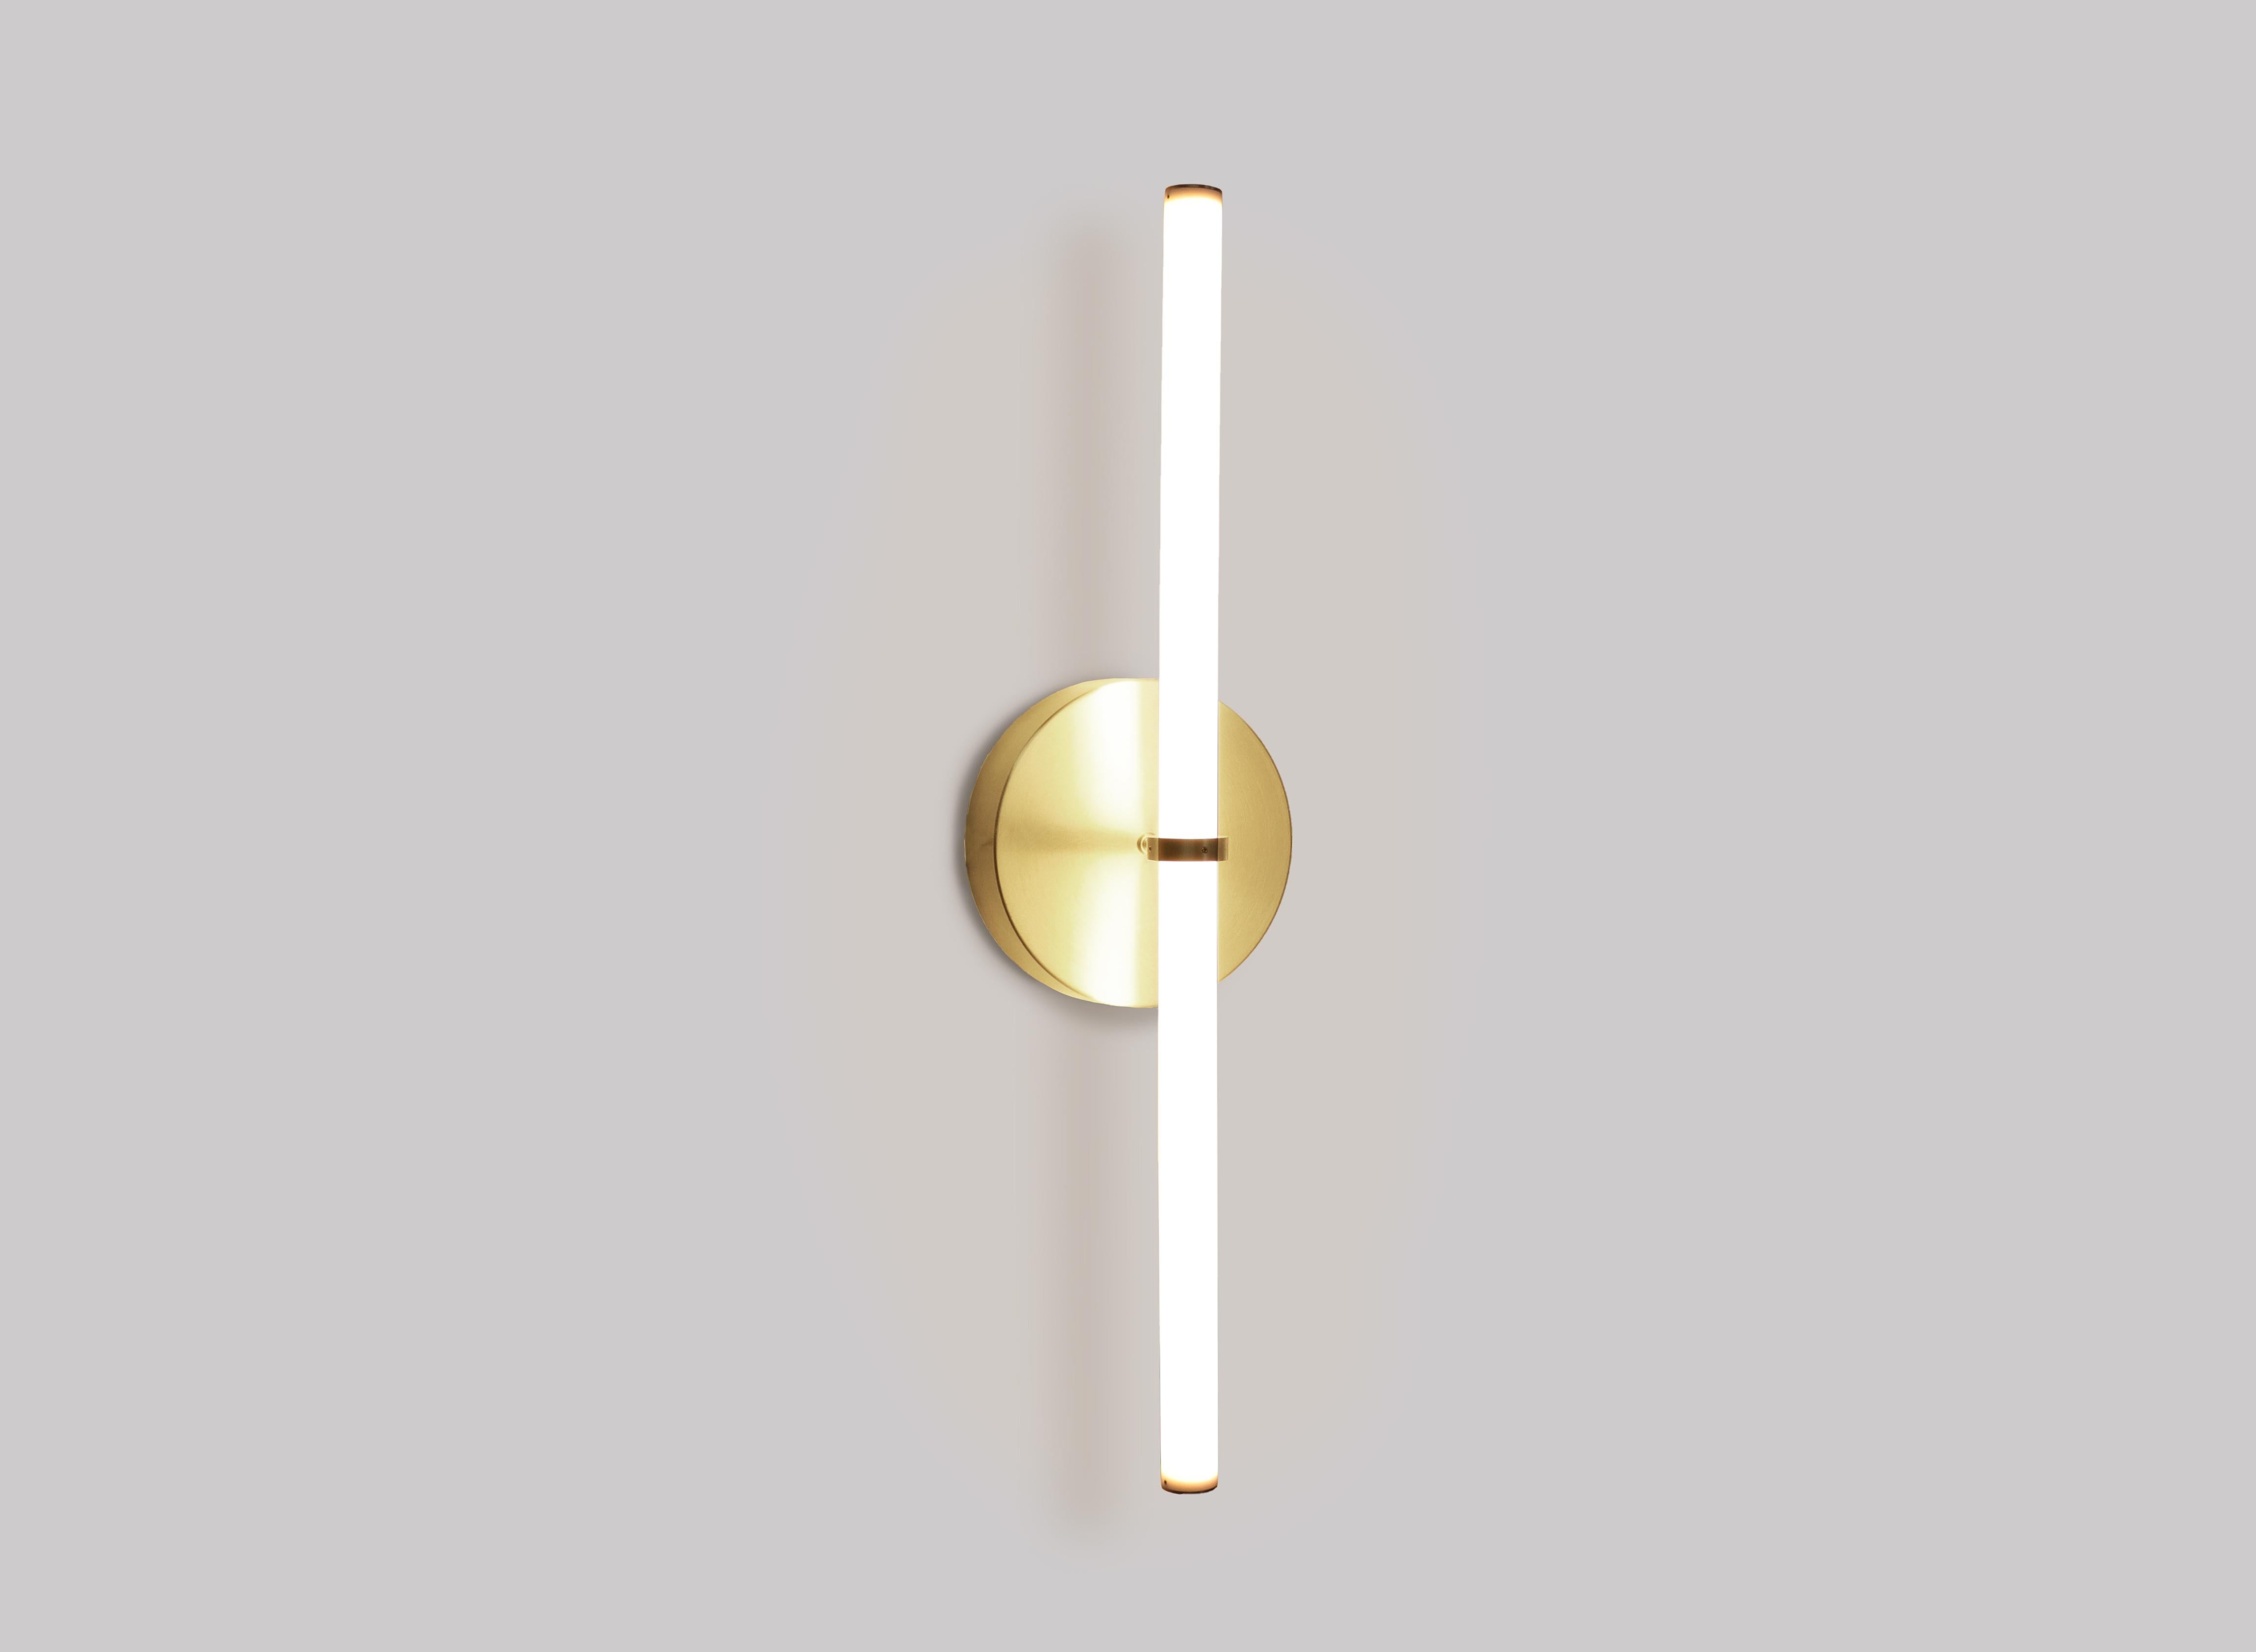 Wall light object.

Formed by basic geometric shapes: circle and a line. Elegant and simple, this light object is a true design masterpiece.

Lead time: 8 weeks
Dimensions: 80/60/40 cm x 5 cm (height to order)
Materials: brass, acrylic tube, LED